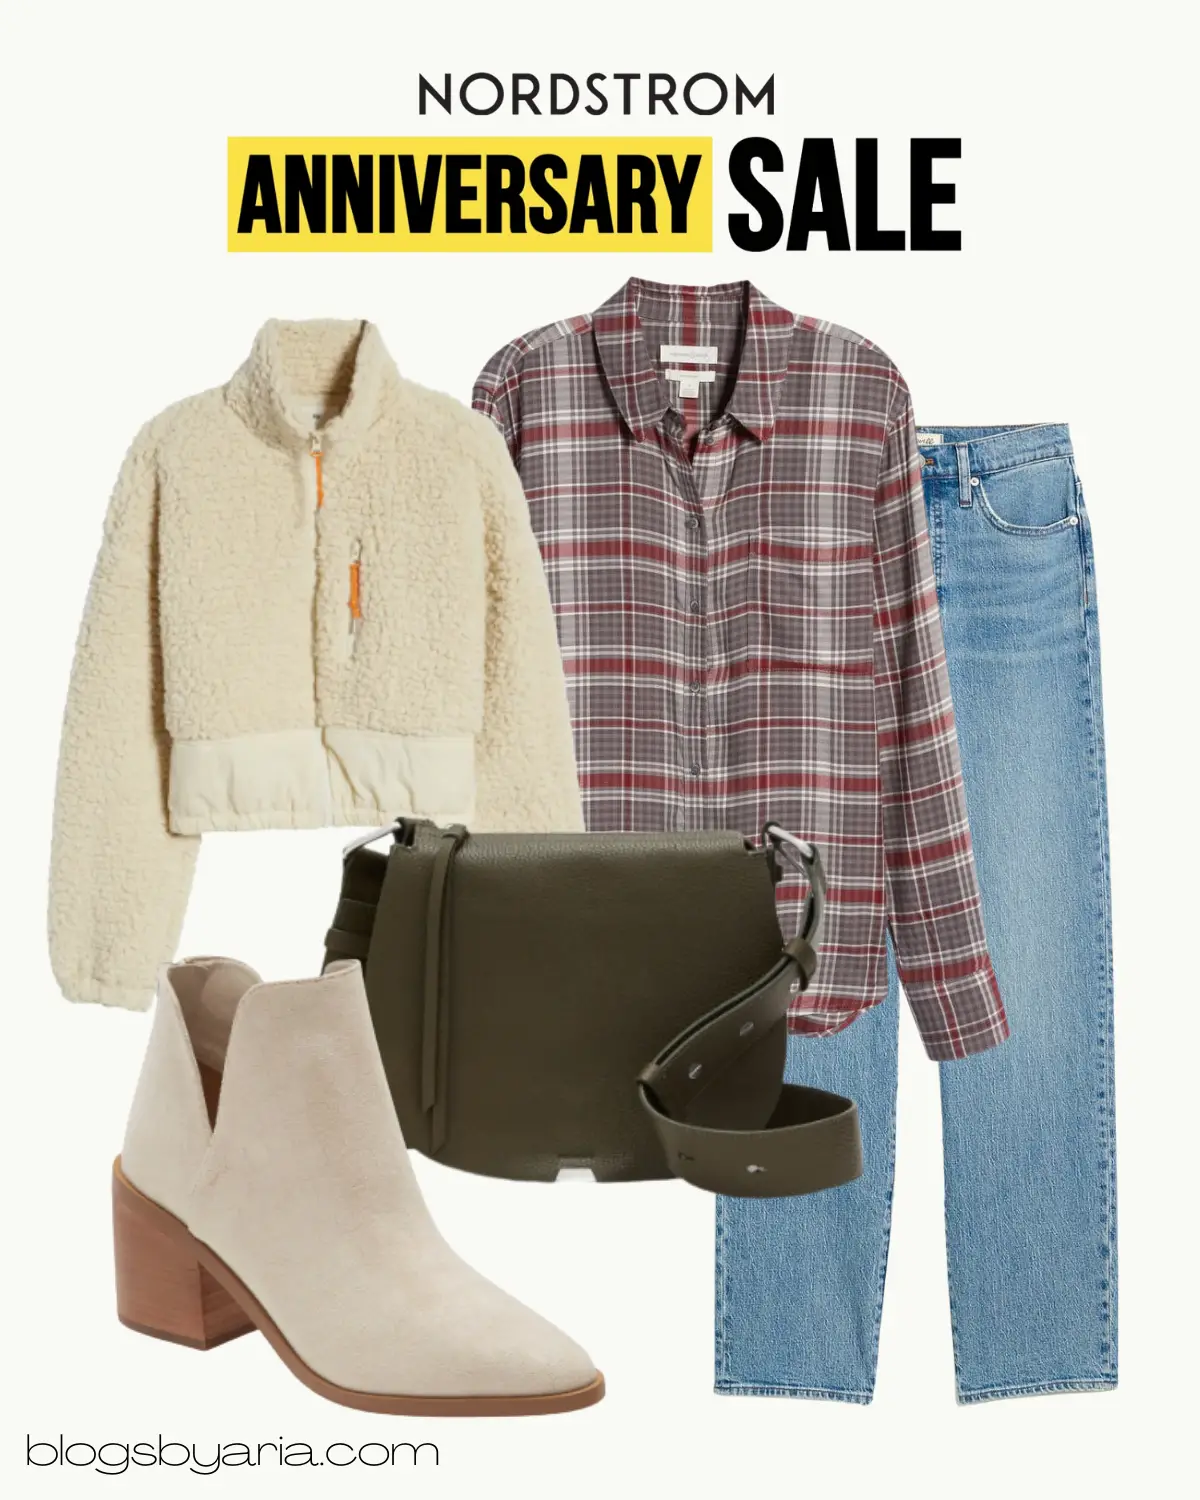 nordstrom anniversary sale outfit inspo